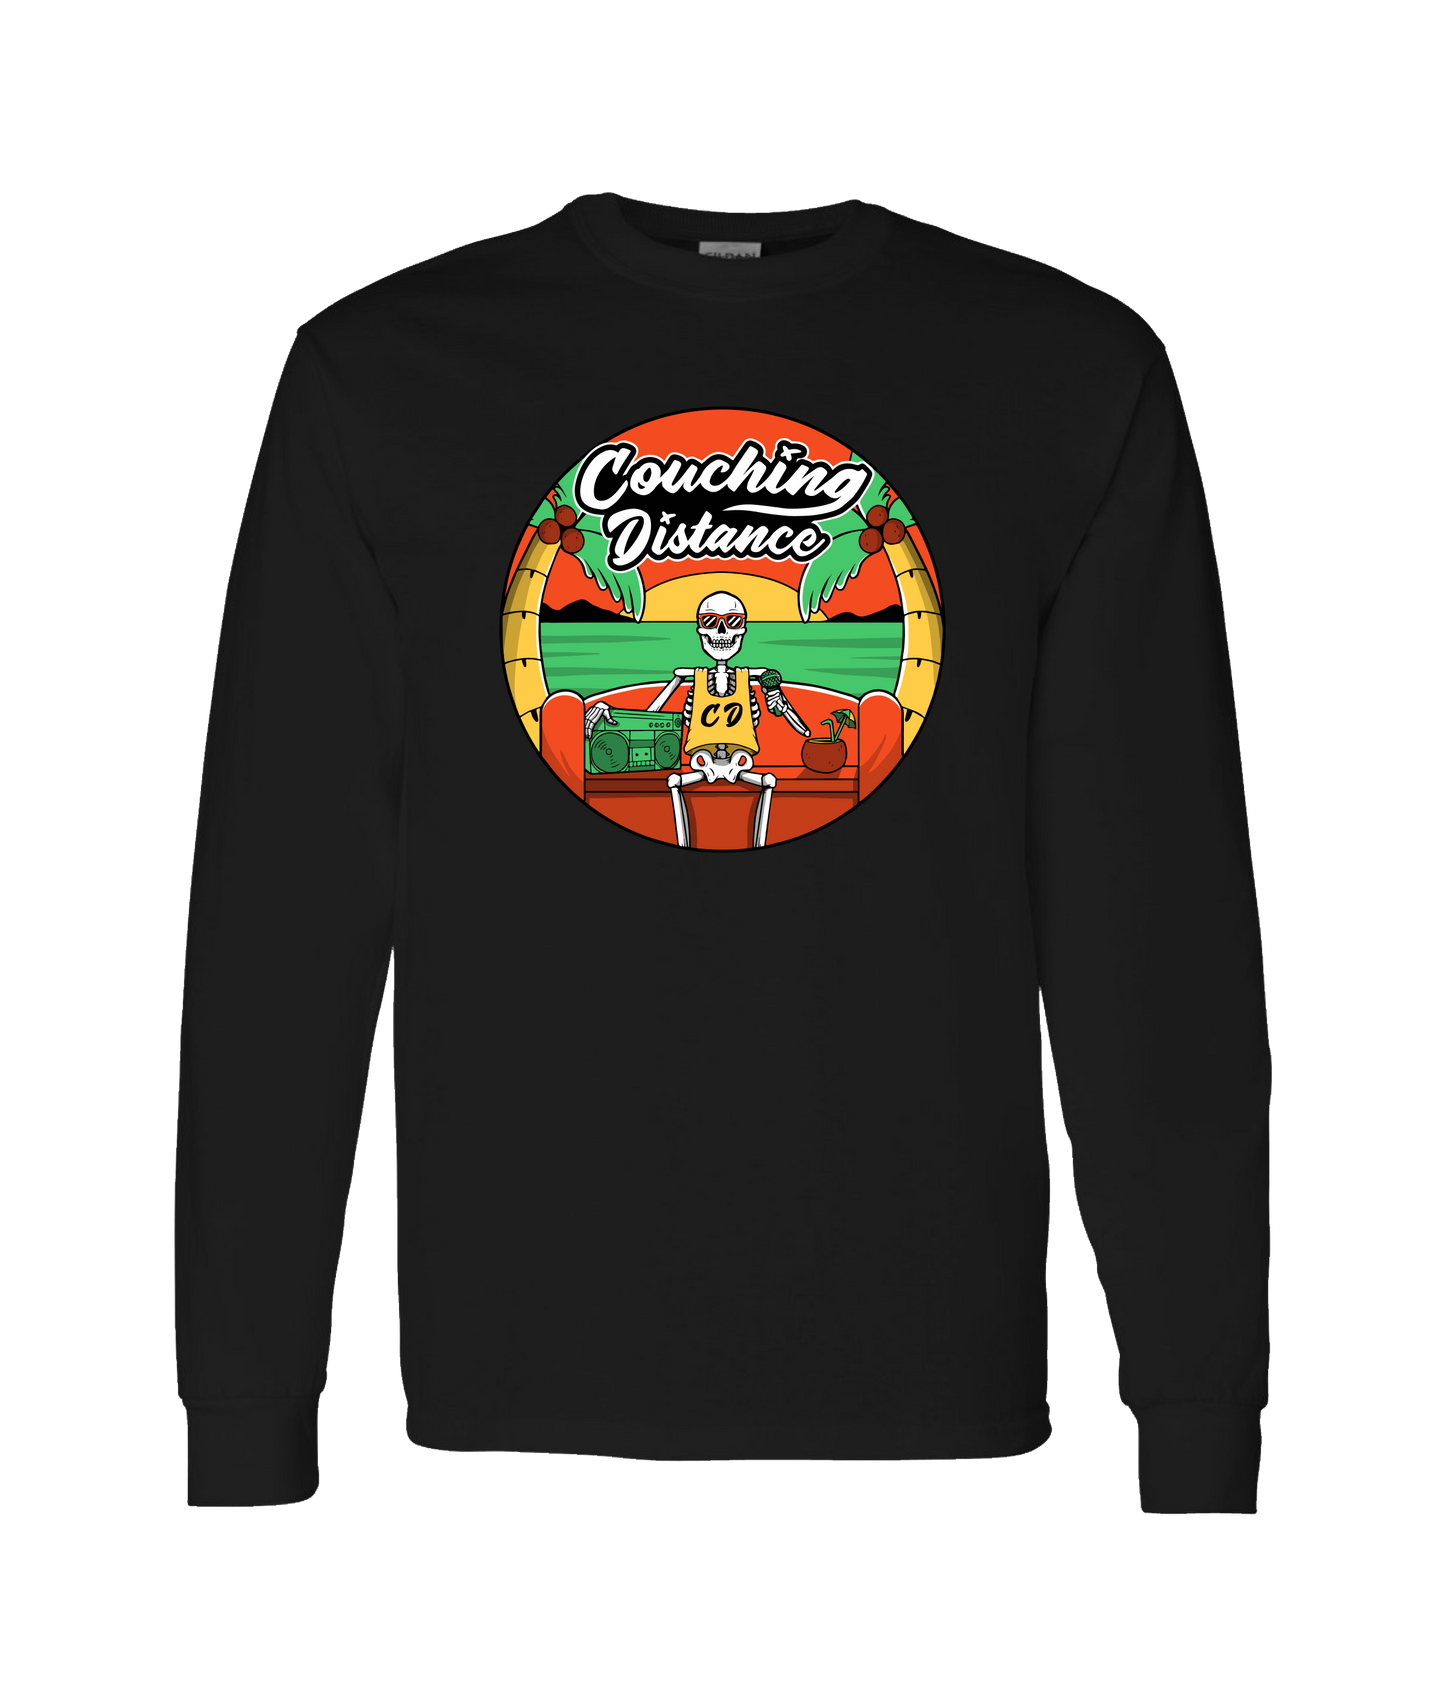 Couching Distance - Chillin - Black Long Sleeve T